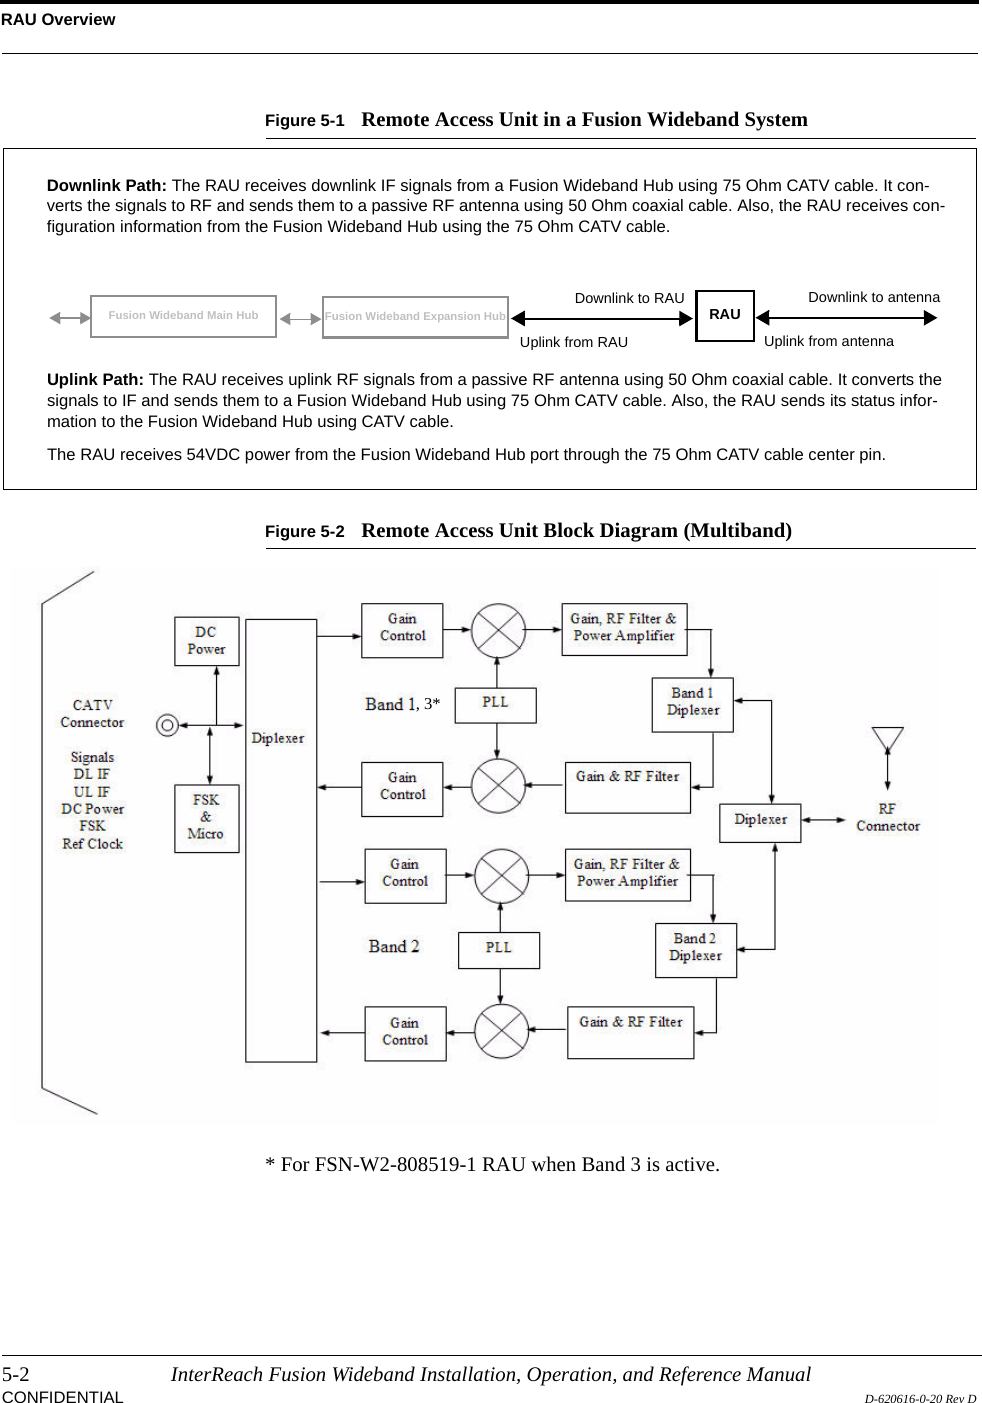 RAU Overview5-2 InterReach Fusion Wideband Installation, Operation, and Reference ManualCONFIDENTIAL D-620616-0-20 Rev DFigure 5-1 Remote Access Unit in a Fusion Wideband SystemFigure 5-2 Remote Access Unit Block Diagram (Multiband)* For FSN-W2-808519-1 RAU when Band 3 is active.Fusion Wideband Expansion Hub RAUDownlink Path: The RAU receives downlink IF signals from a Fusion Wideband Hub using 75 Ohm CATV cable. It con-verts the signals to RF and sends them to a passive RF antenna using 50 Ohm coaxial cable. Also, the RAU receives con-figuration information from the Fusion Wideband Hub using the 75 Ohm CATV cable.Uplink Path: The RAU receives uplink RF signals from a passive RF antenna using 50 Ohm coaxial cable. It converts the signals to IF and sends them to a Fusion Wideband Hub using 75 Ohm CATV cable. Also, the RAU sends its status infor-mation to the Fusion Wideband Hub using CATV cable.The RAU receives 54VDC power from the Fusion Wideband Hub port through the 75 Ohm CATV cable center pin.Downlink to RAUUplink from RAUFusion Wideband Main HubDownlink to antennaUplink from antenna, 3*